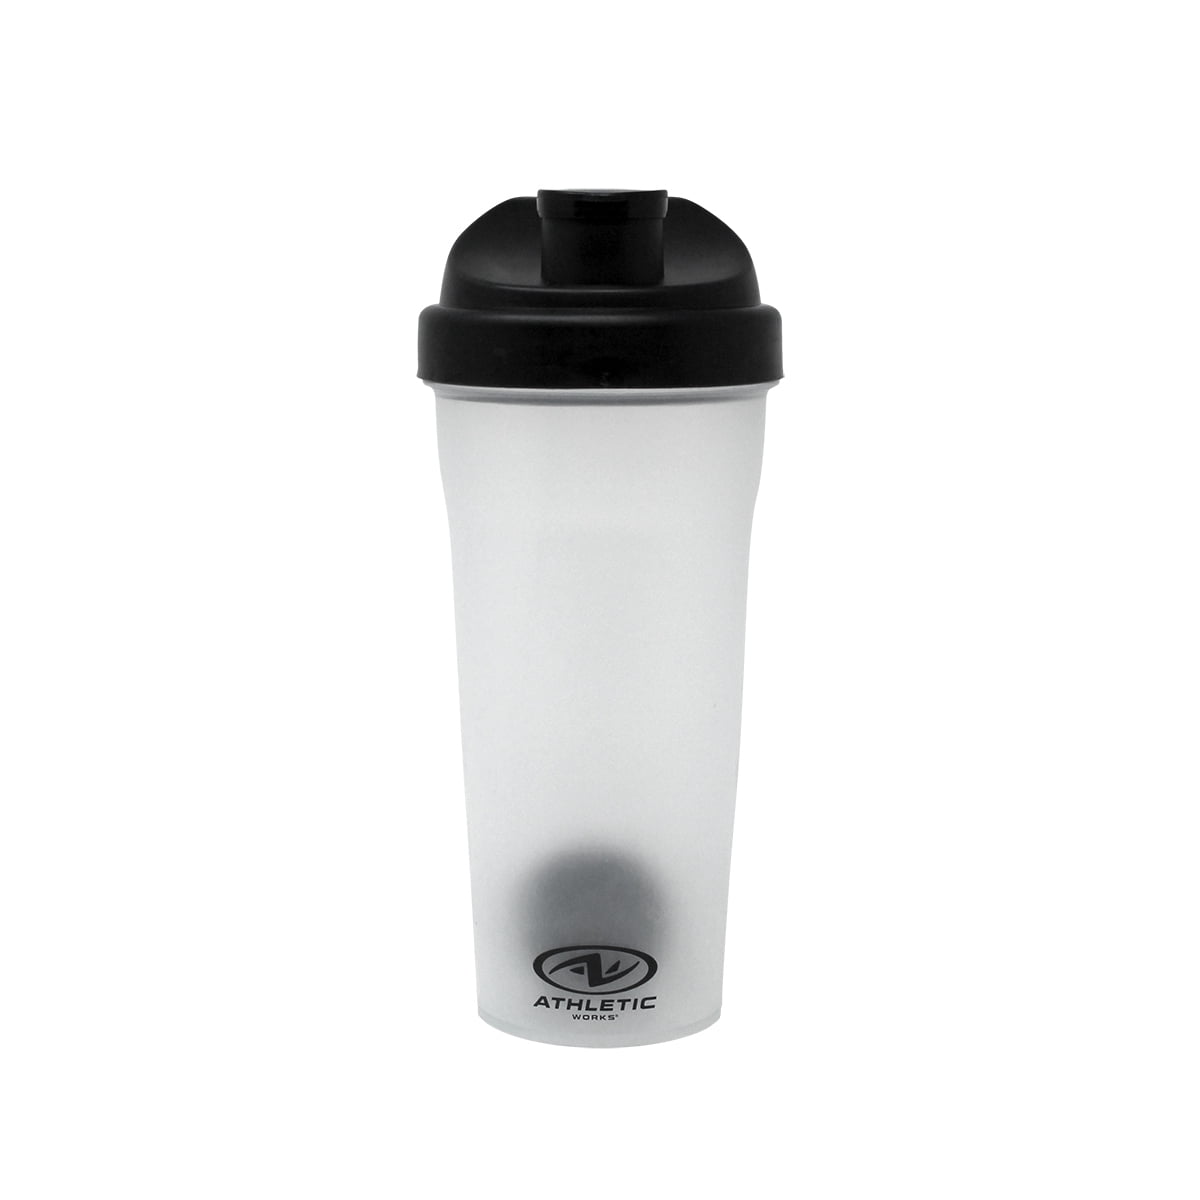 Protein Shaker Bottle,Shaker Bottles for Protein Mixes,Portable Sport Clear  Water Bottles,Whey Prote…See more Protein Shaker Bottle,Shaker Bottles for